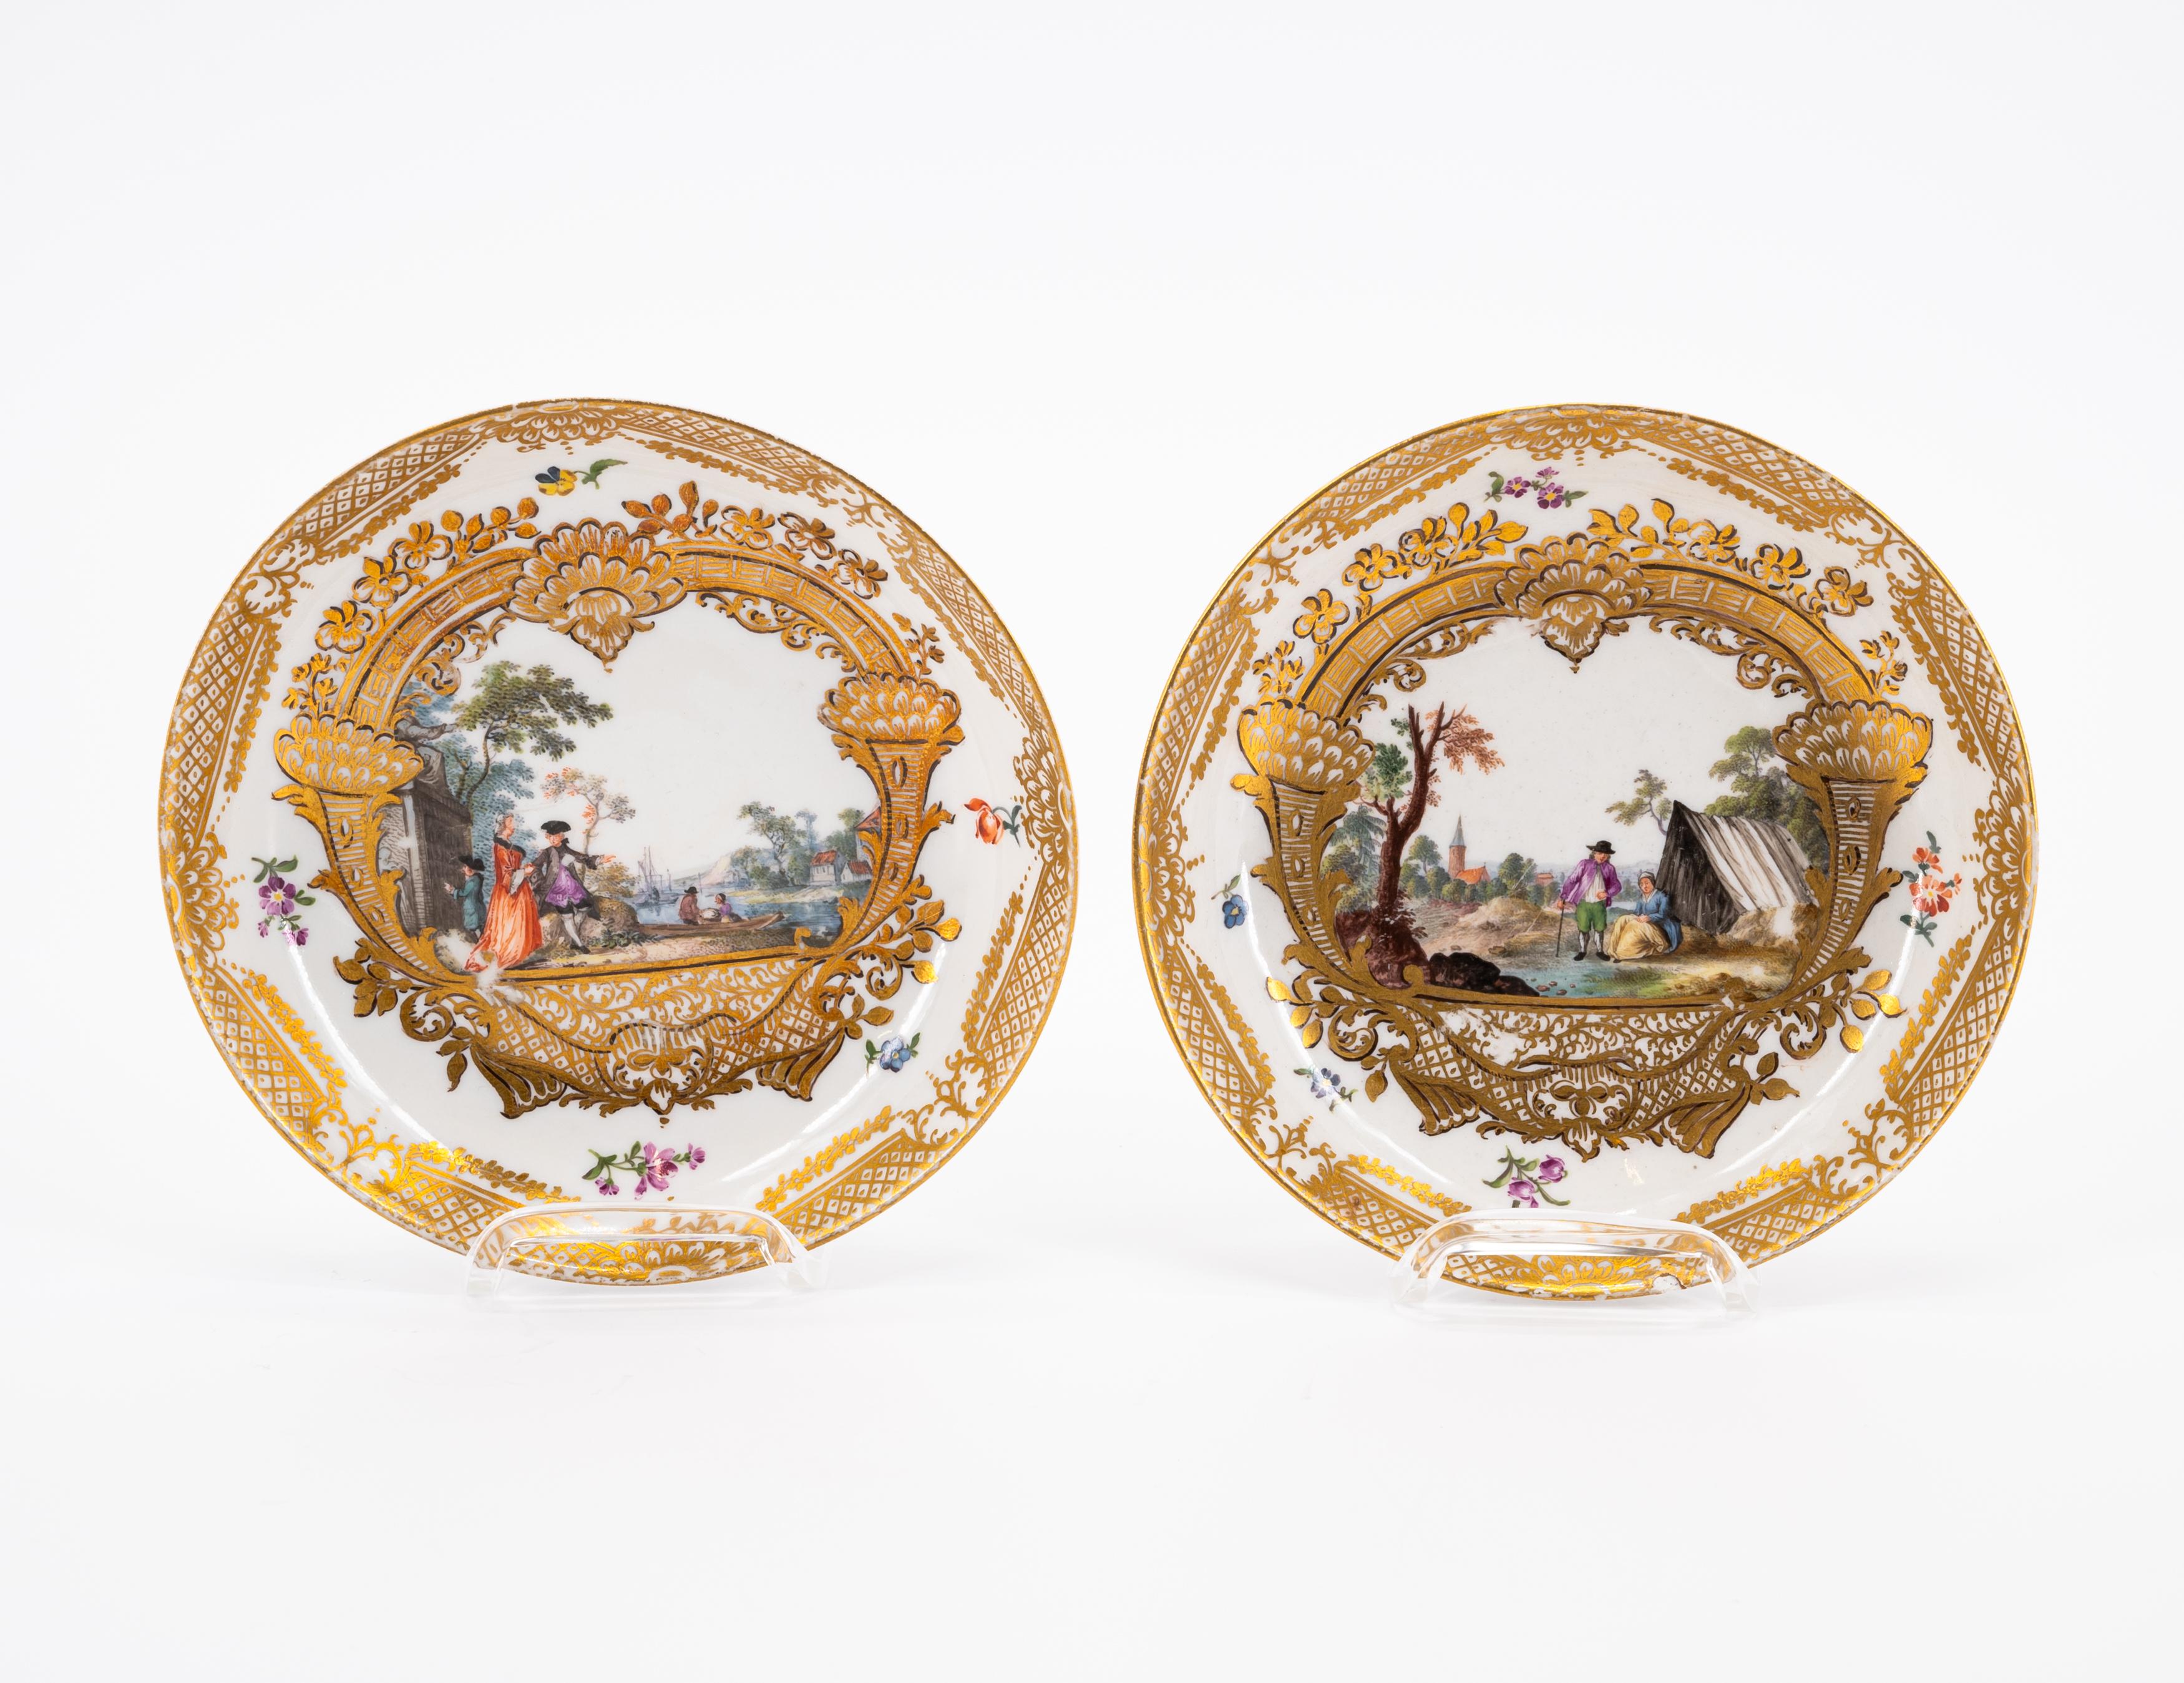 FOUR SMALL PORCELAIN PLATES WITH GOLD CONTOURED WATTEAU SCENES OUTLINES - Image 4 of 5